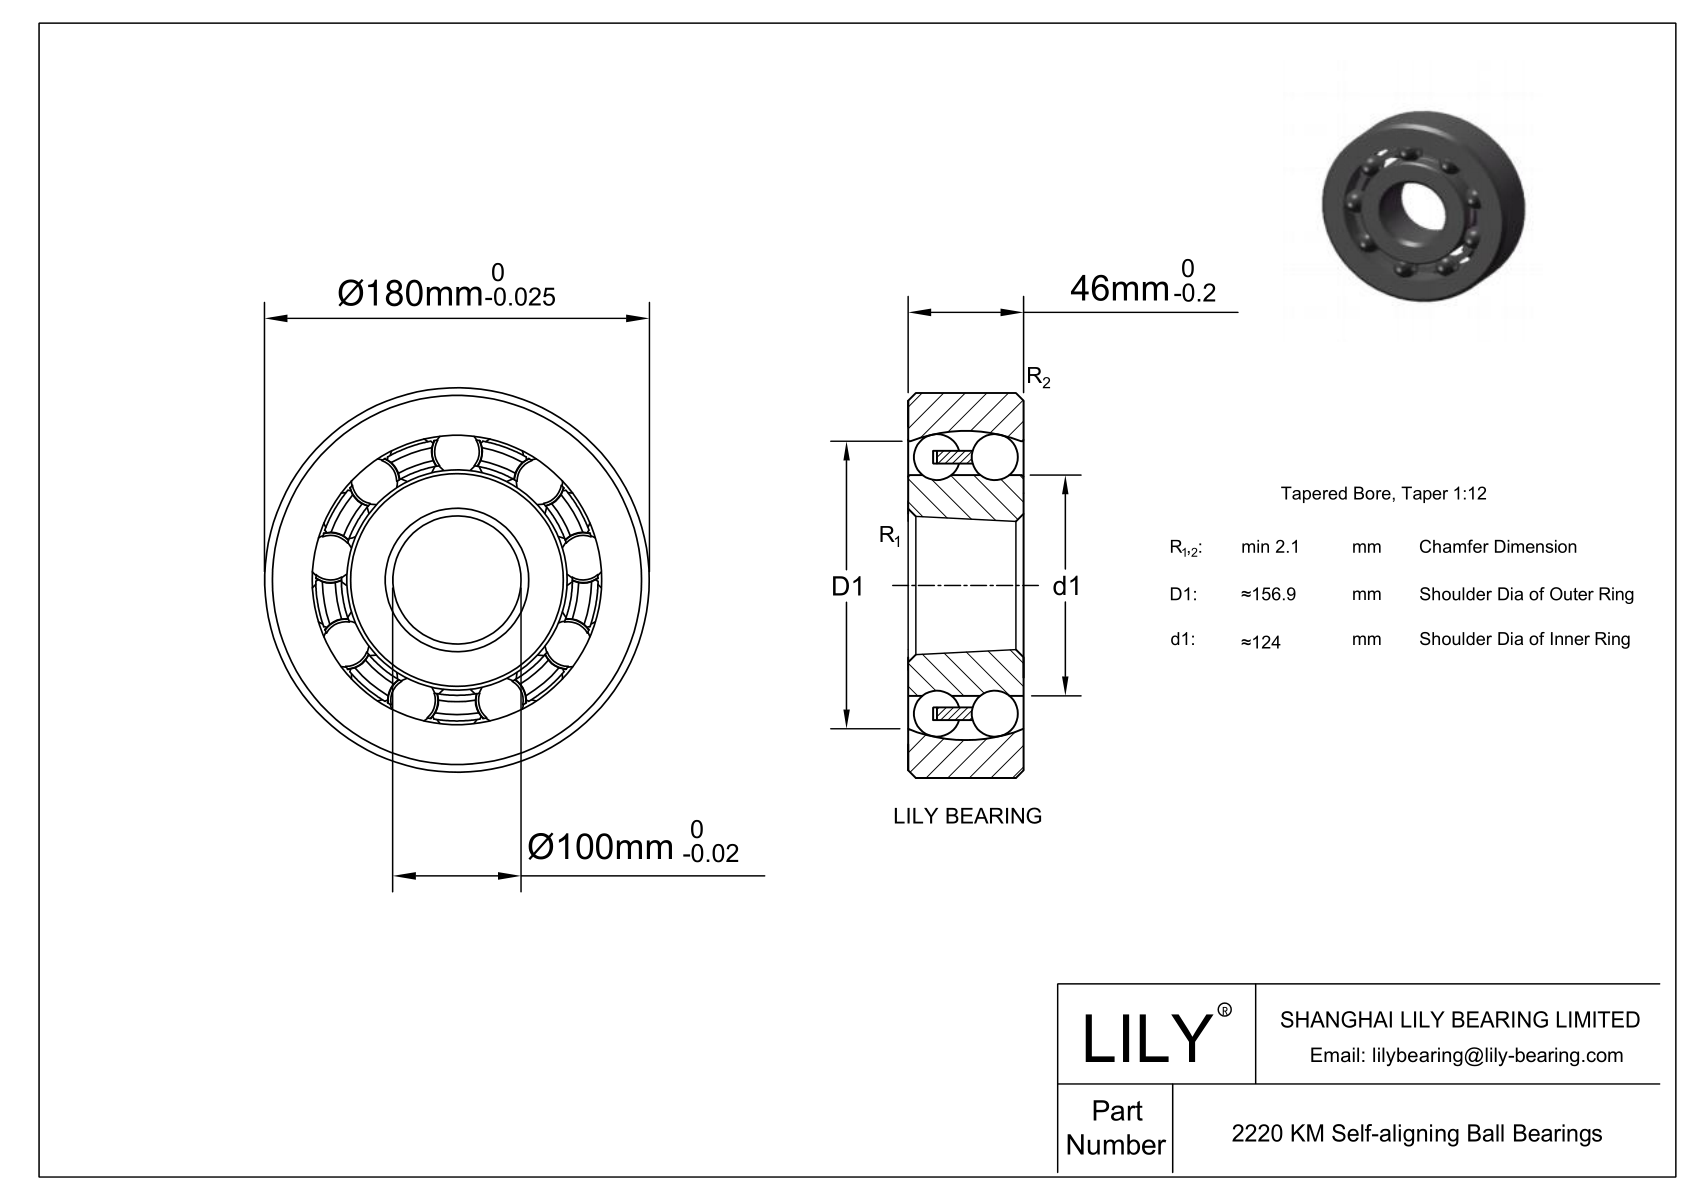 S2220 KM Stainless Steel Self Aligning Ball Bearings cad drawing